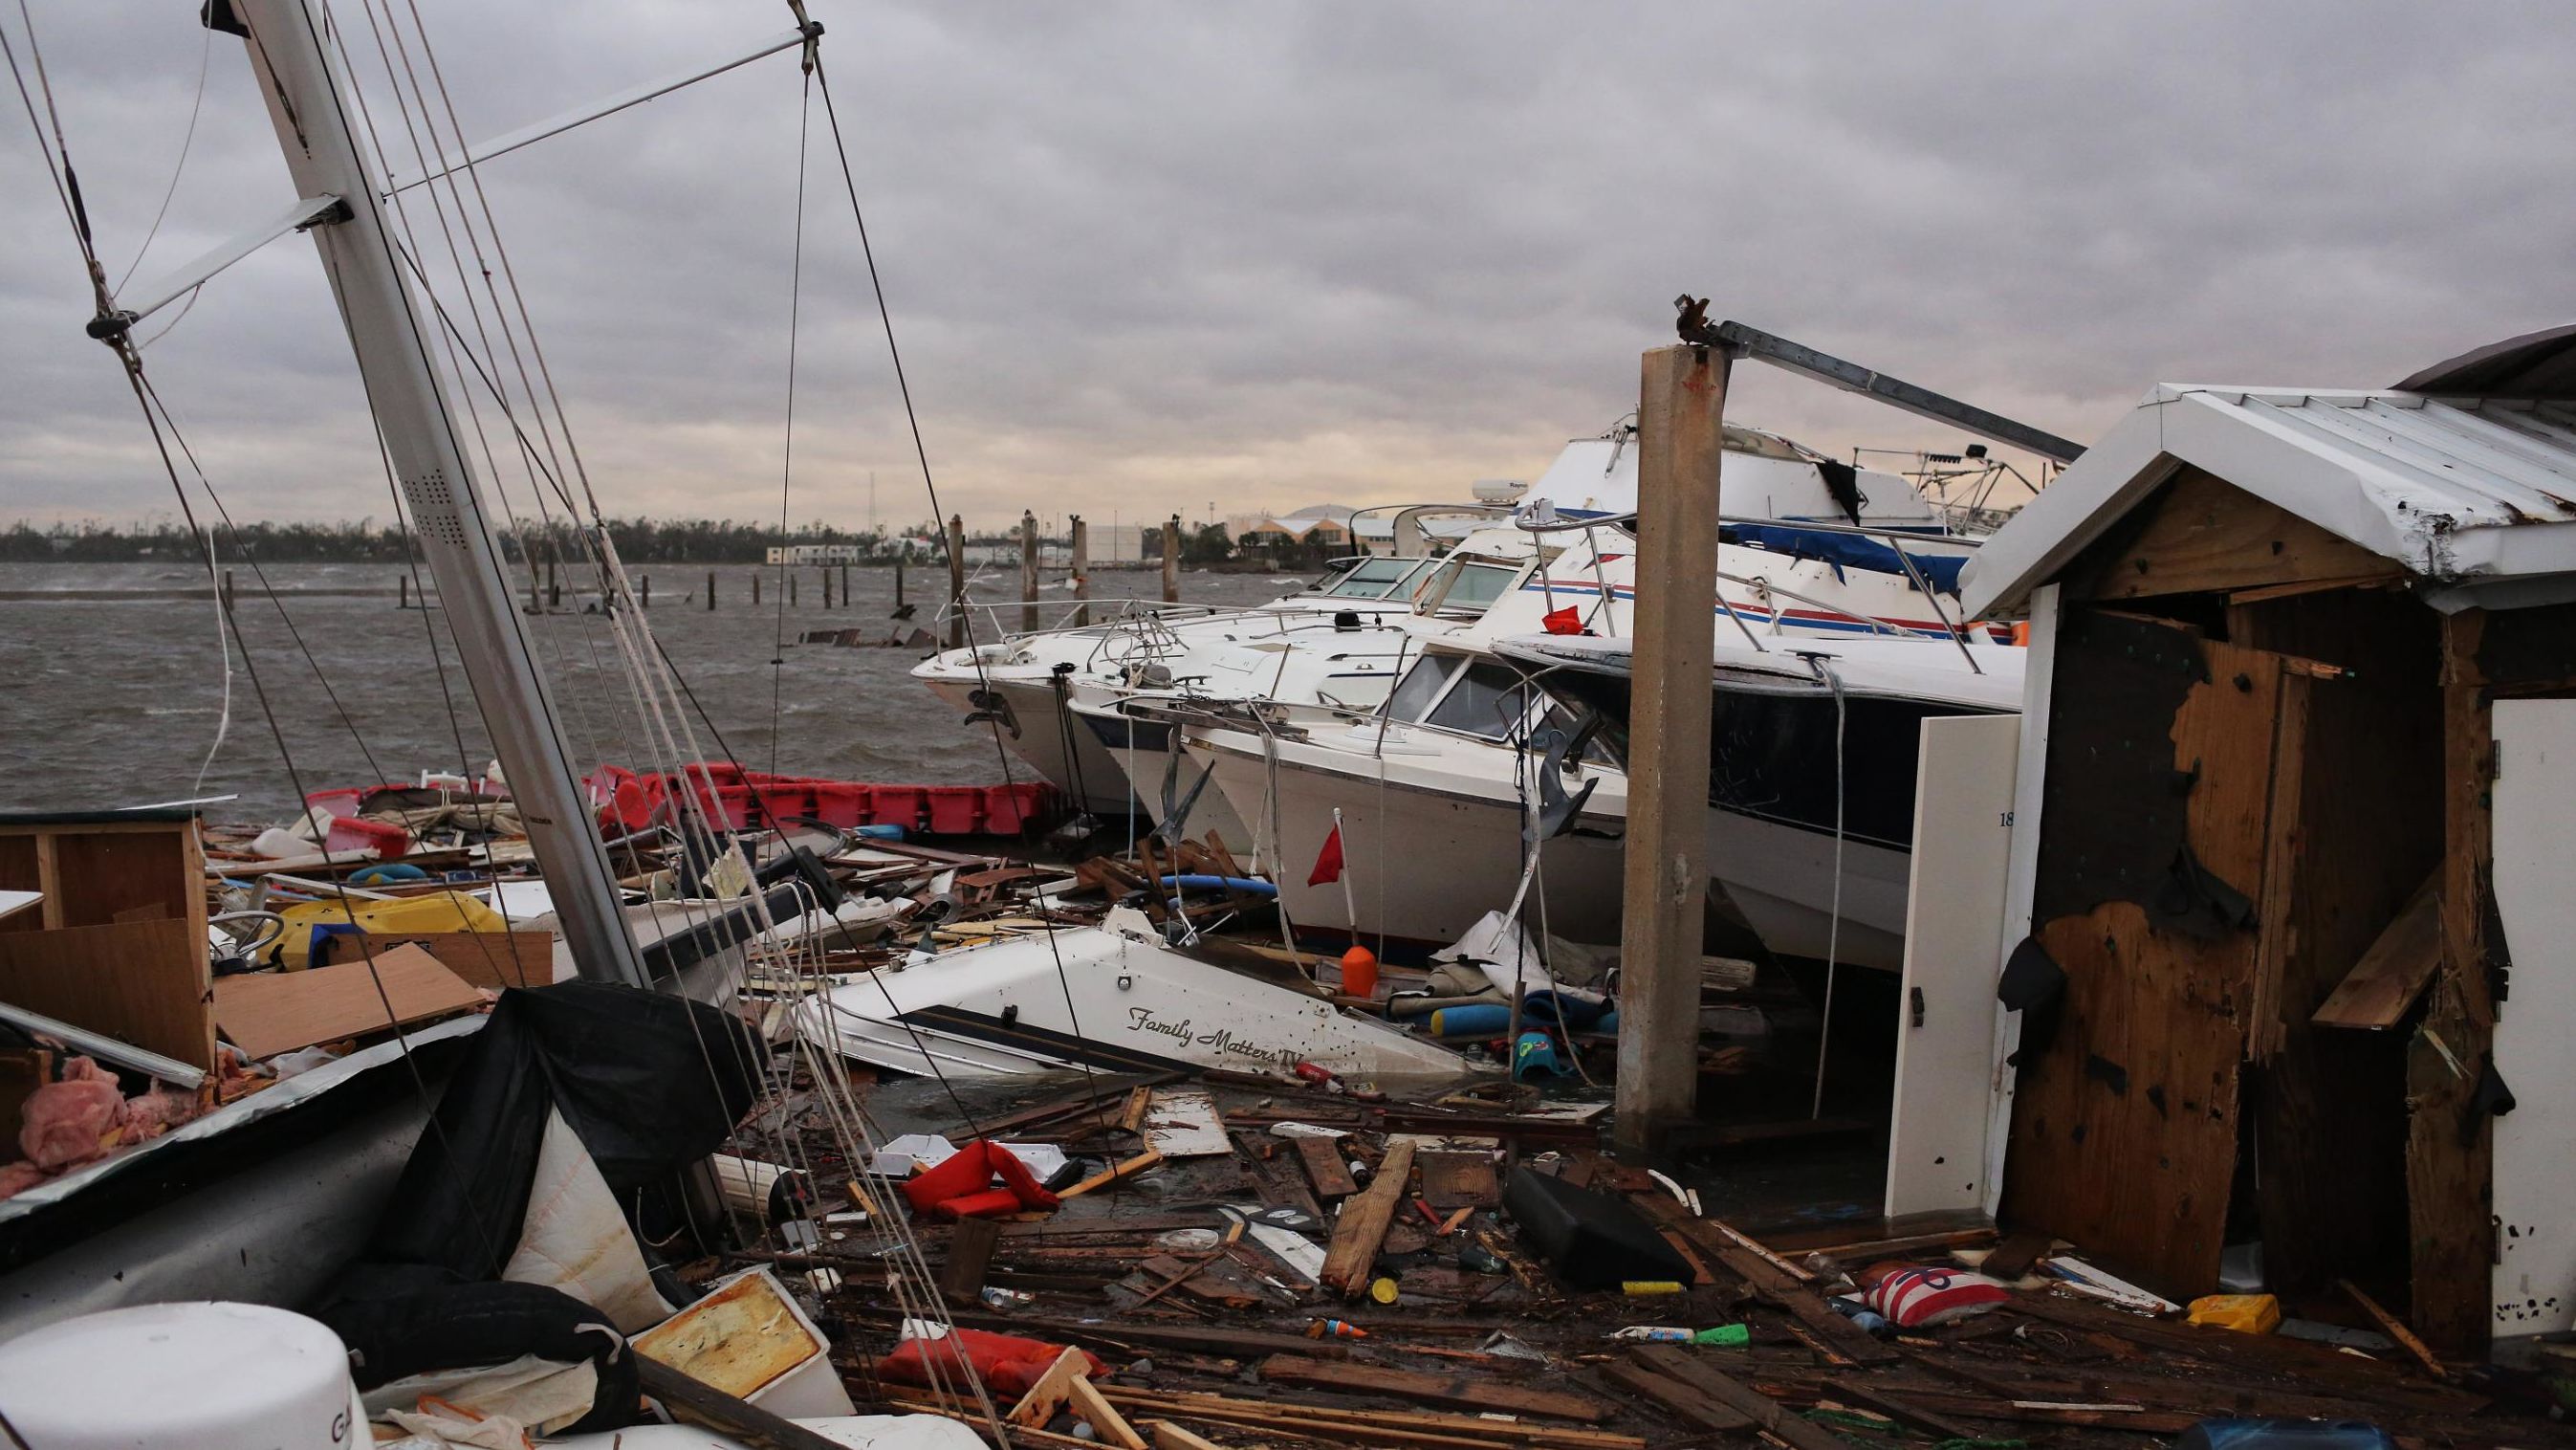 Wrecked boats sit near a pier in Panama City.